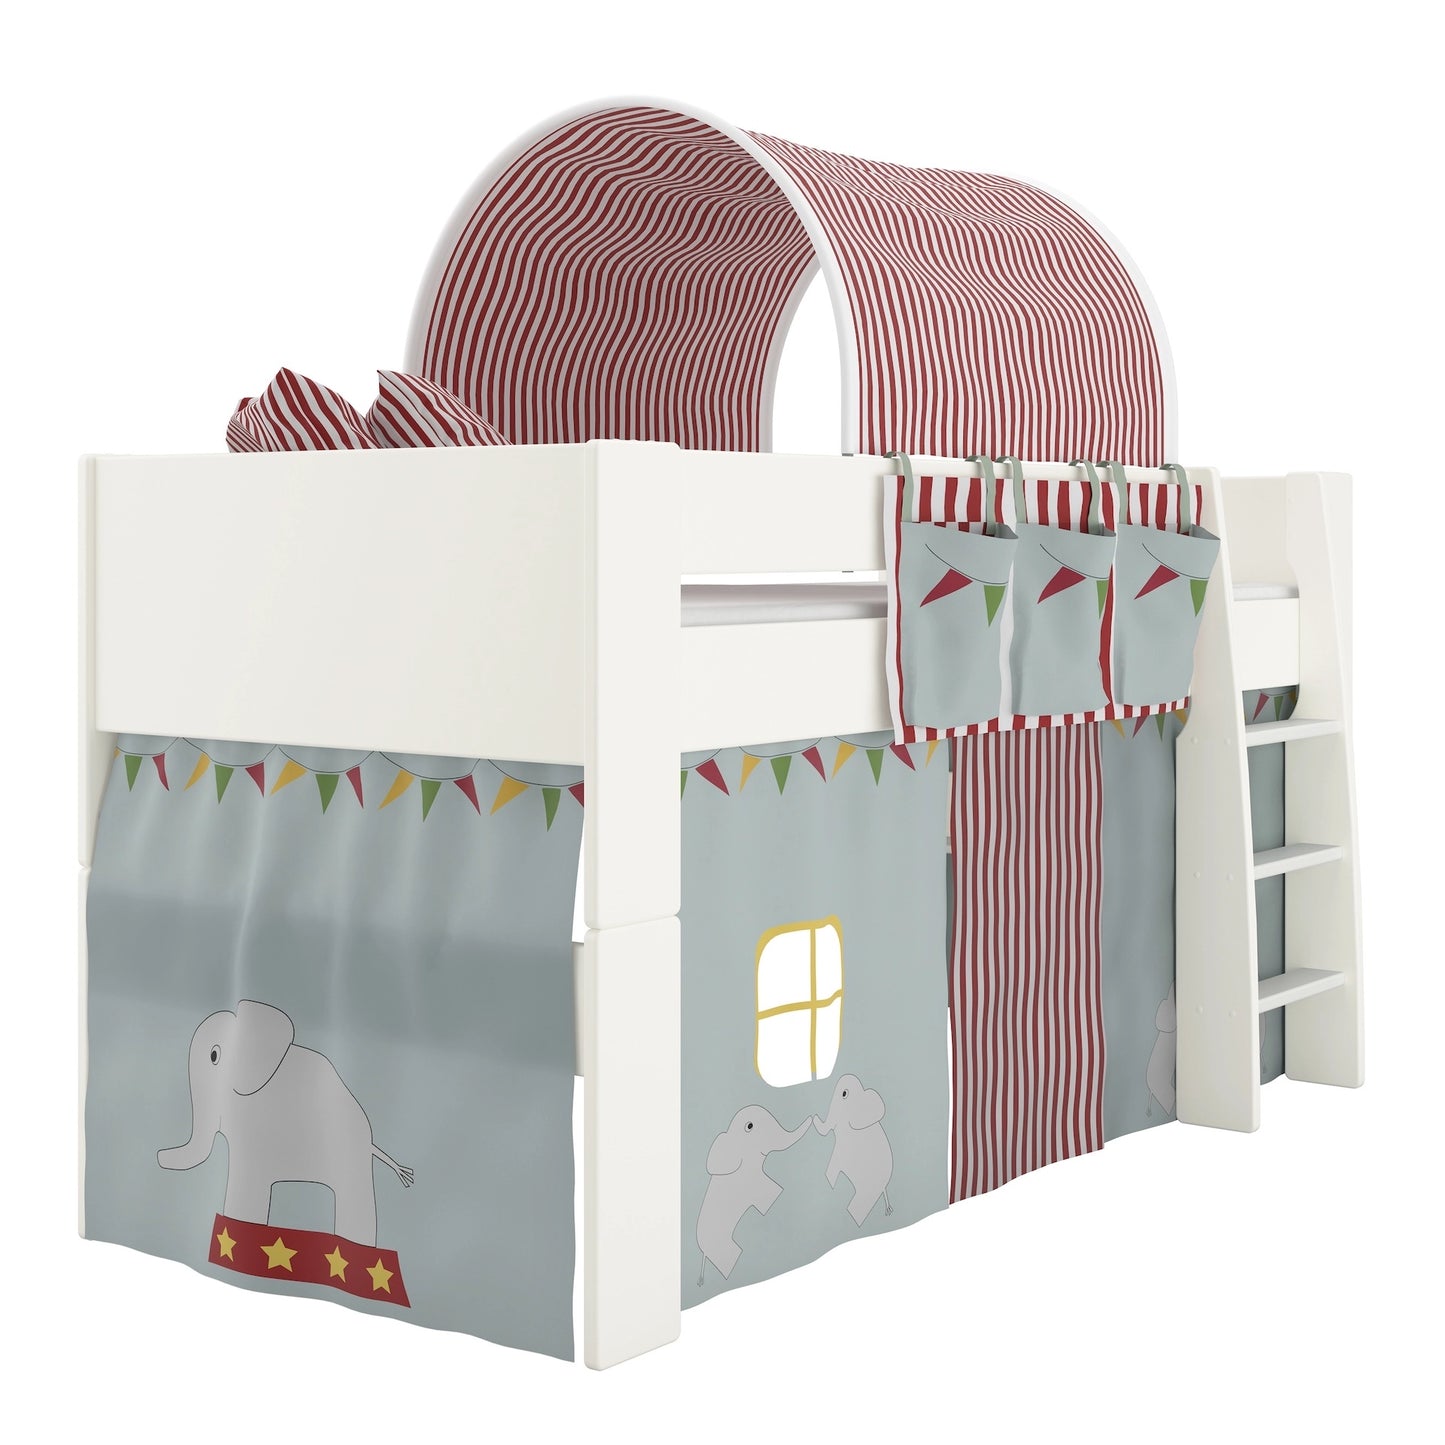 Furniture To Go Steens For Kids Circus Tunnel